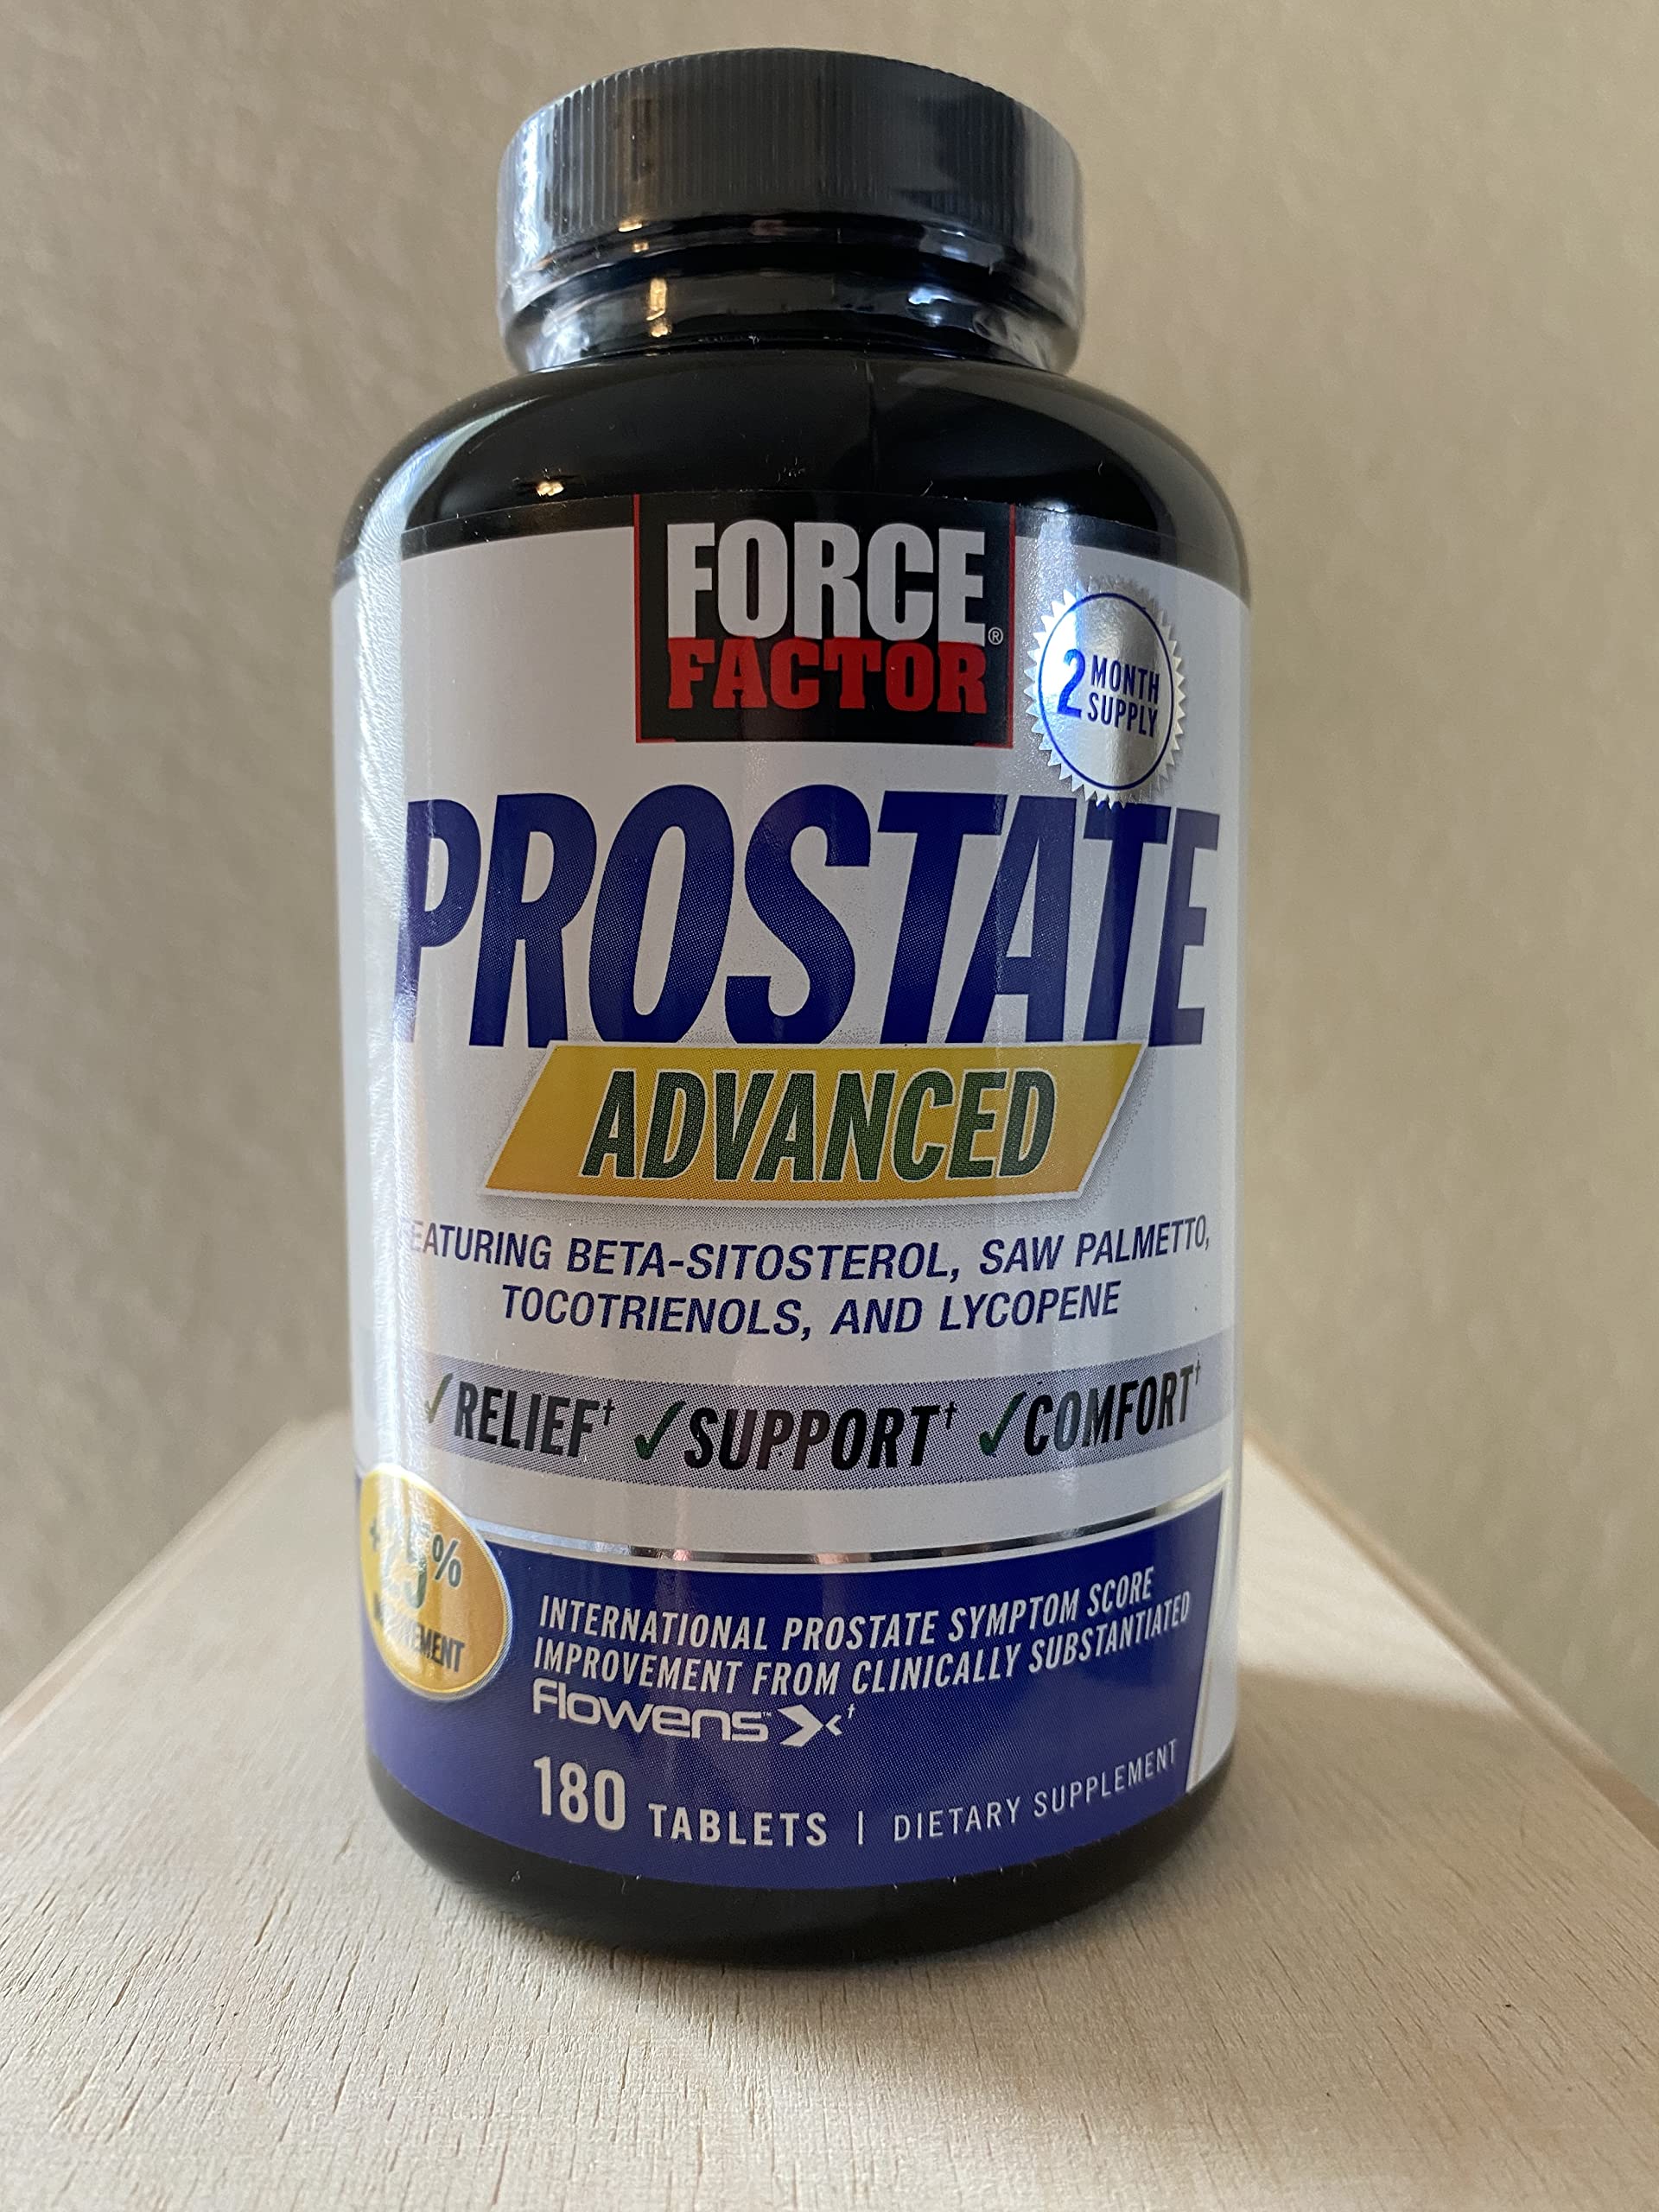 Force Factor Prostate Advanced, Health Supplement for Men for Reducing Nighttime Bathroom Trips, Bladder & Urinary Relief, with Saw Palmetto, Beta-Sitosterol, 180 Tablets (1-Pack)